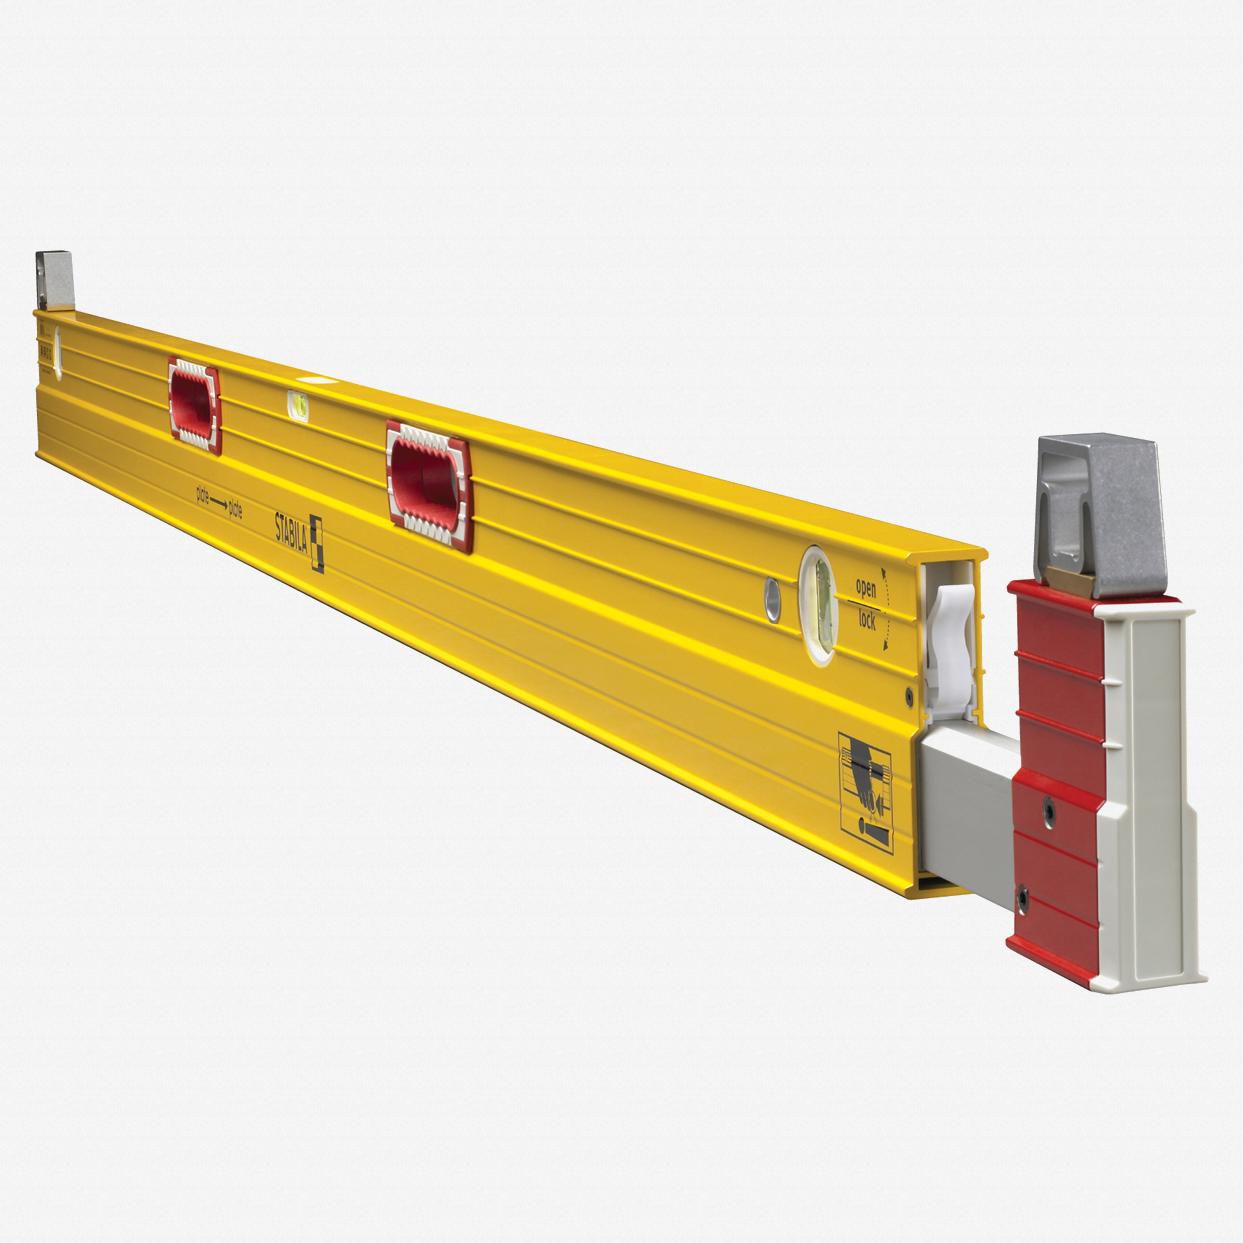 Stabila 35712 Type 106T Extendable Plate Level, 7' - 12' with Removable Stand-Offs - KC Tool